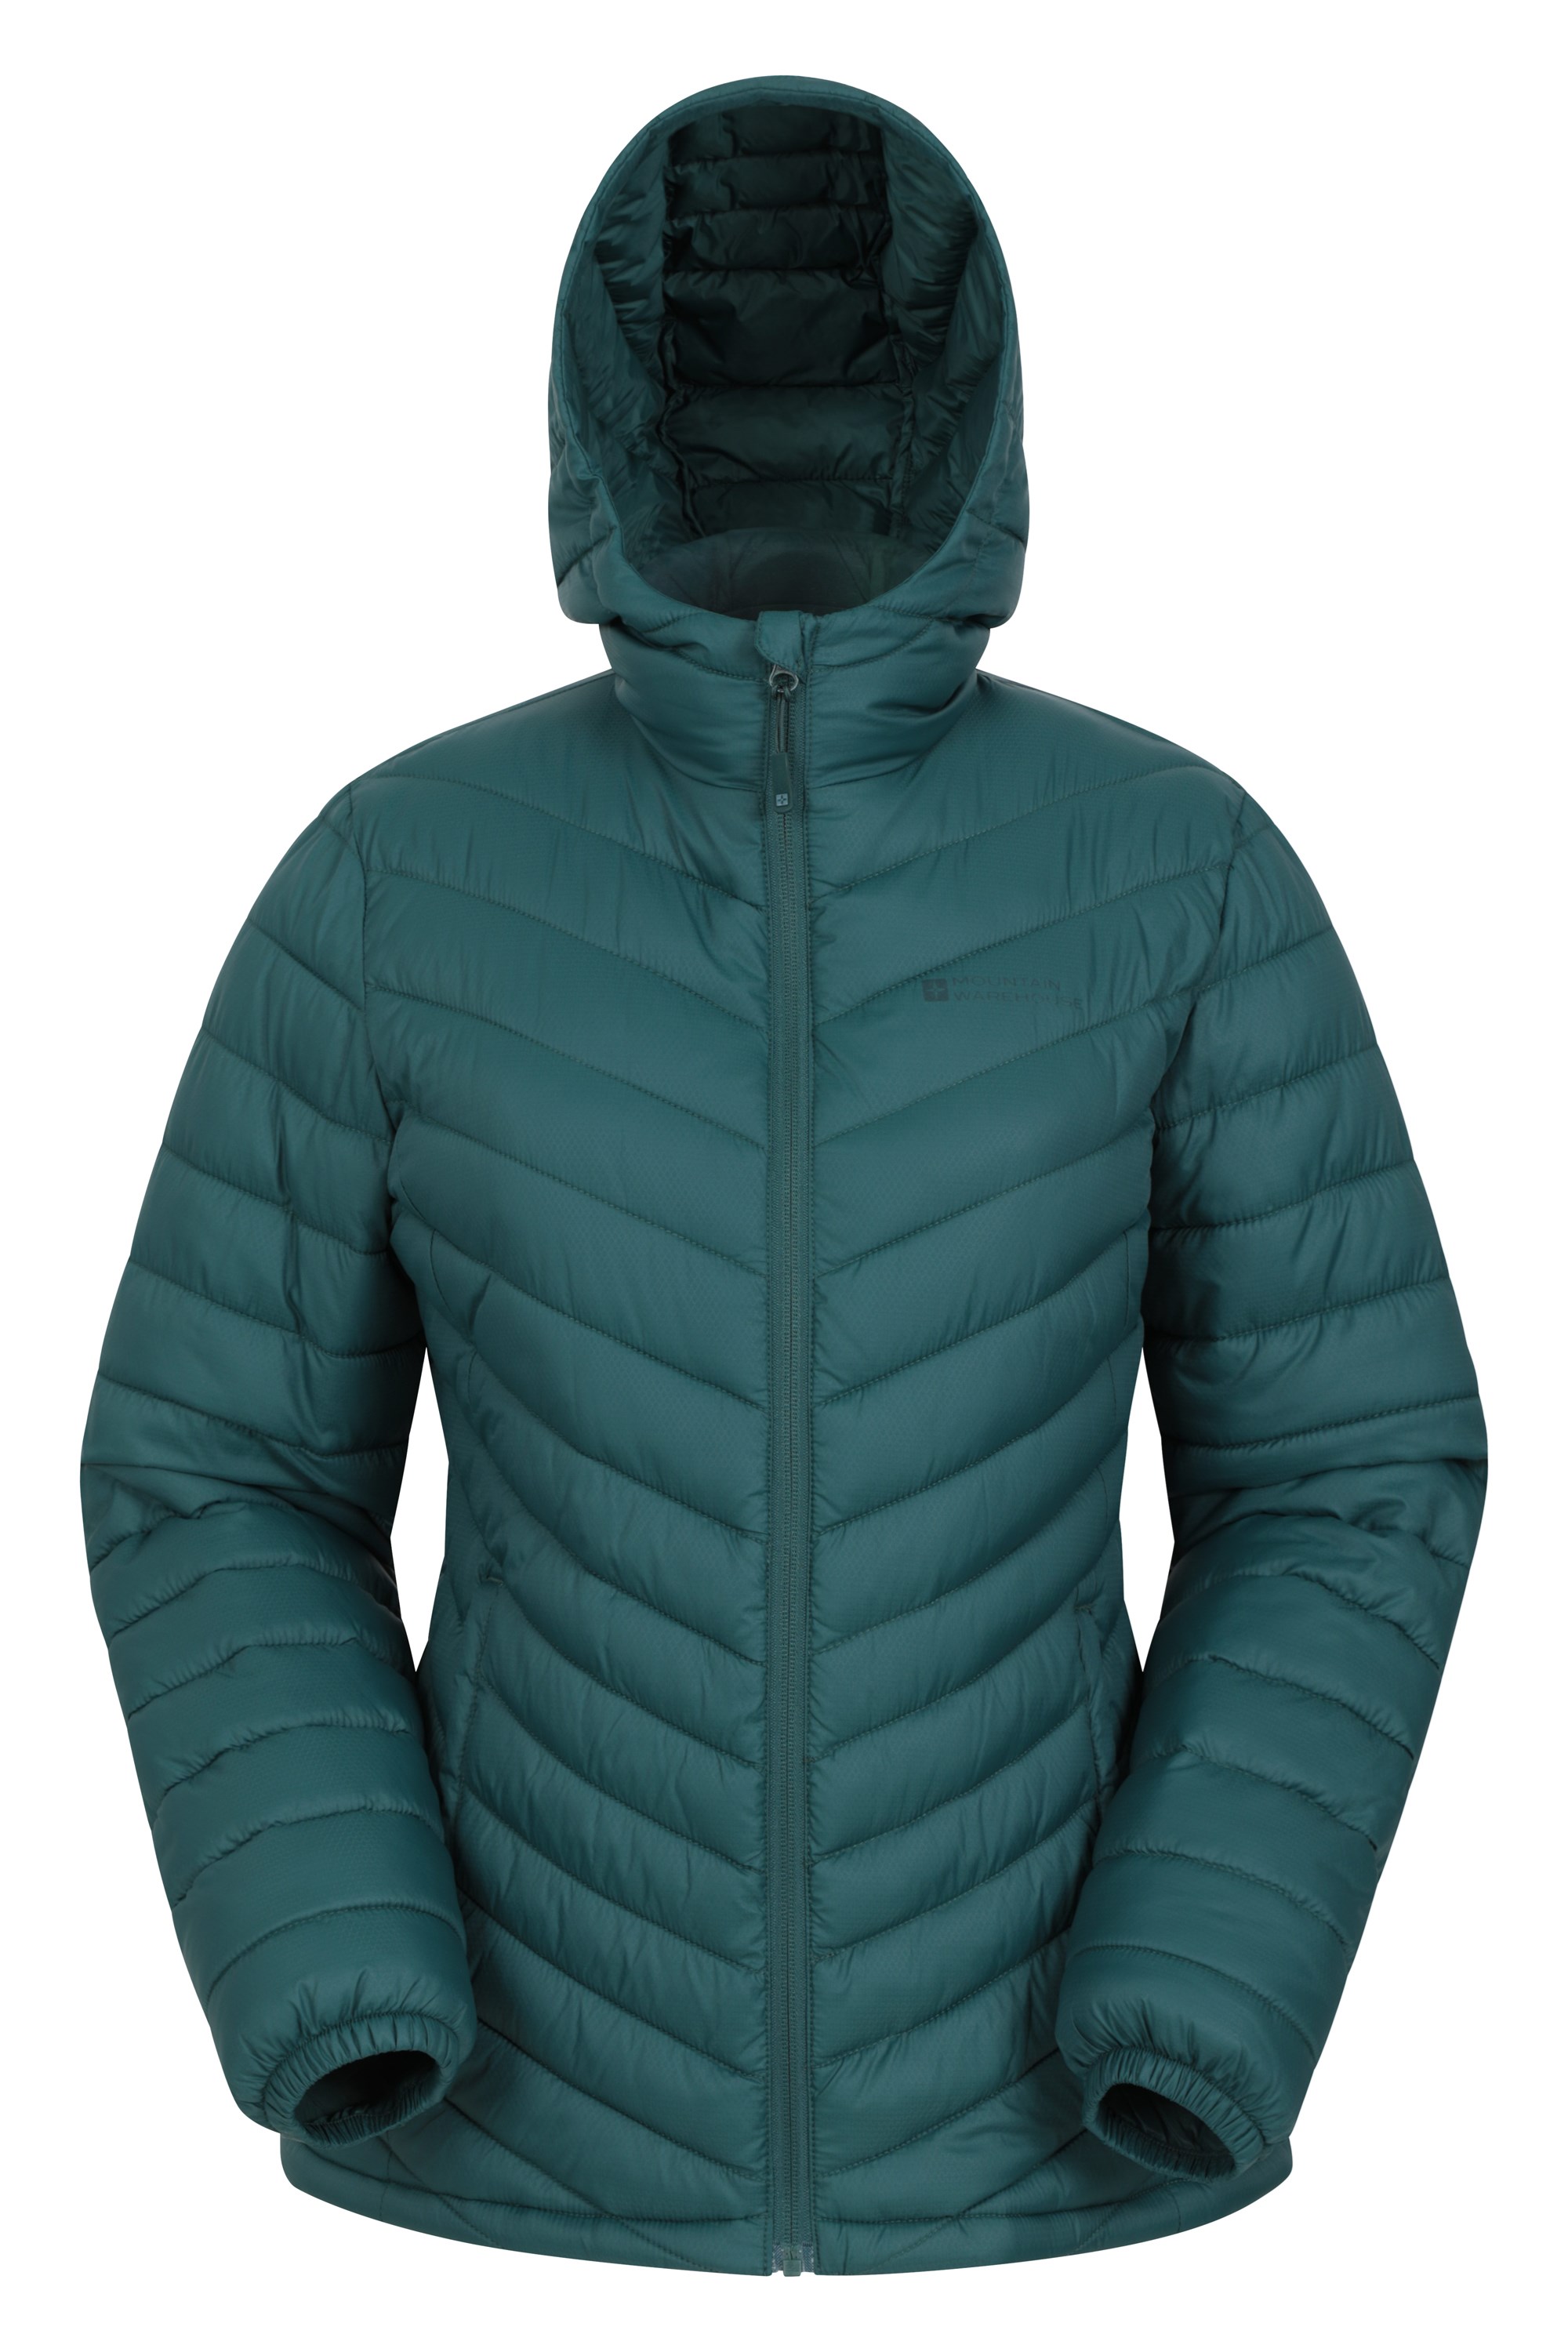 Womens Outdoor ☀ Down Jacket Clearance ...